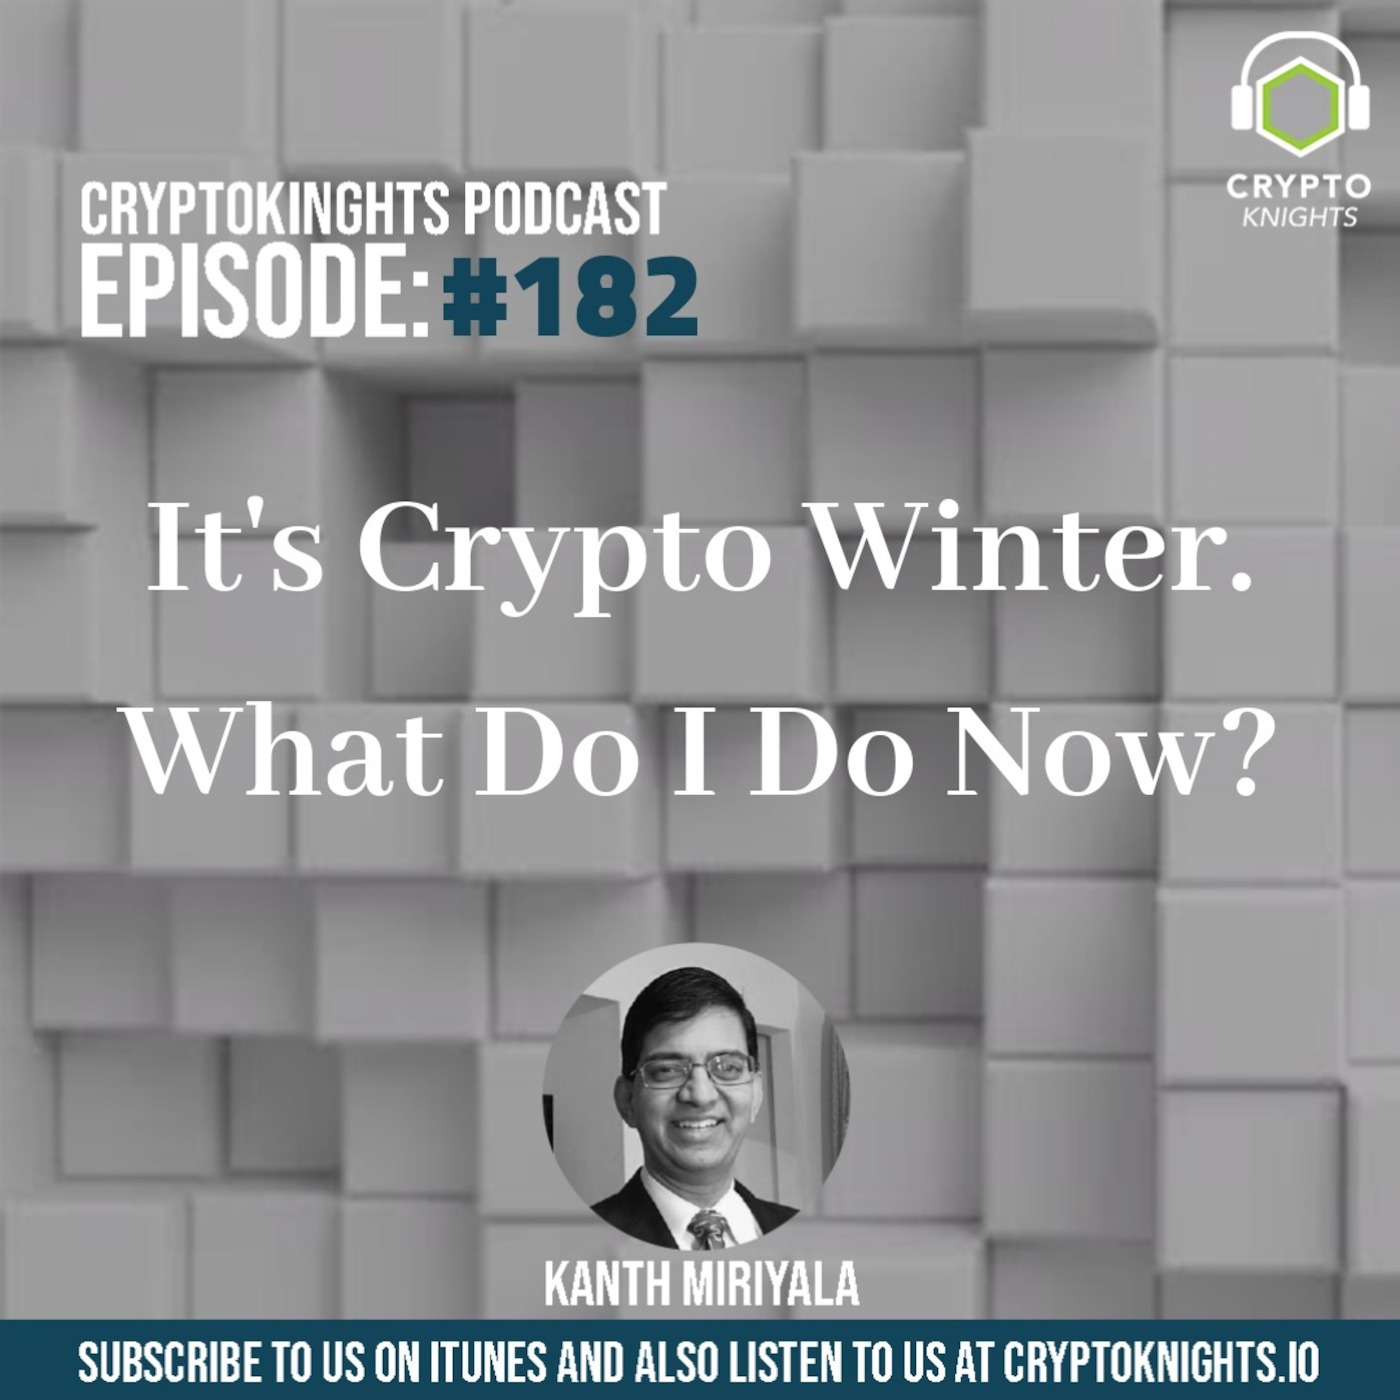 Episode 182 - It's Crypto Winter. What Do I Do Now?